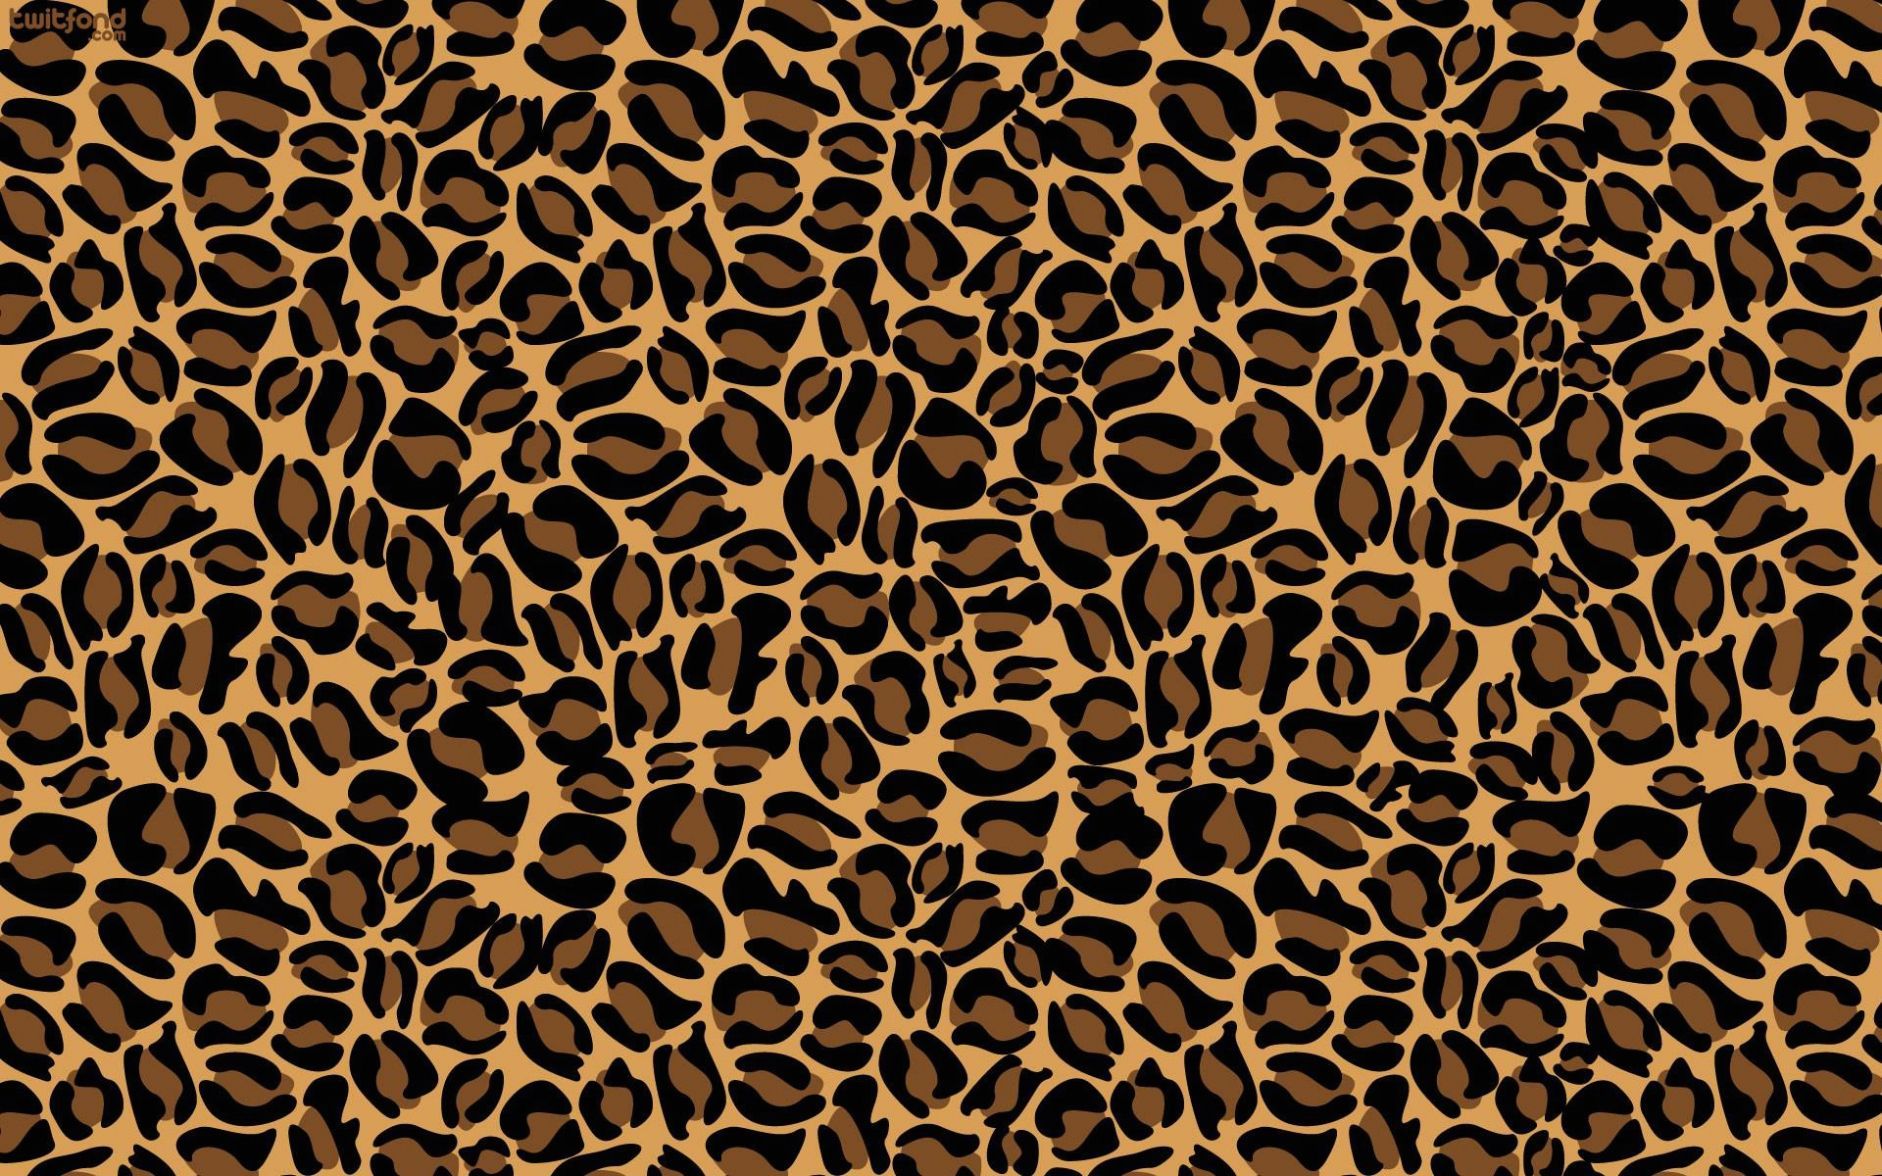 Premium Vector  Leopard print cheetah seamless pattern jaguar texture  jungle exotic background leo repeat design wild animals fur illustration  abstract camouflage for textile wallpaper fabric